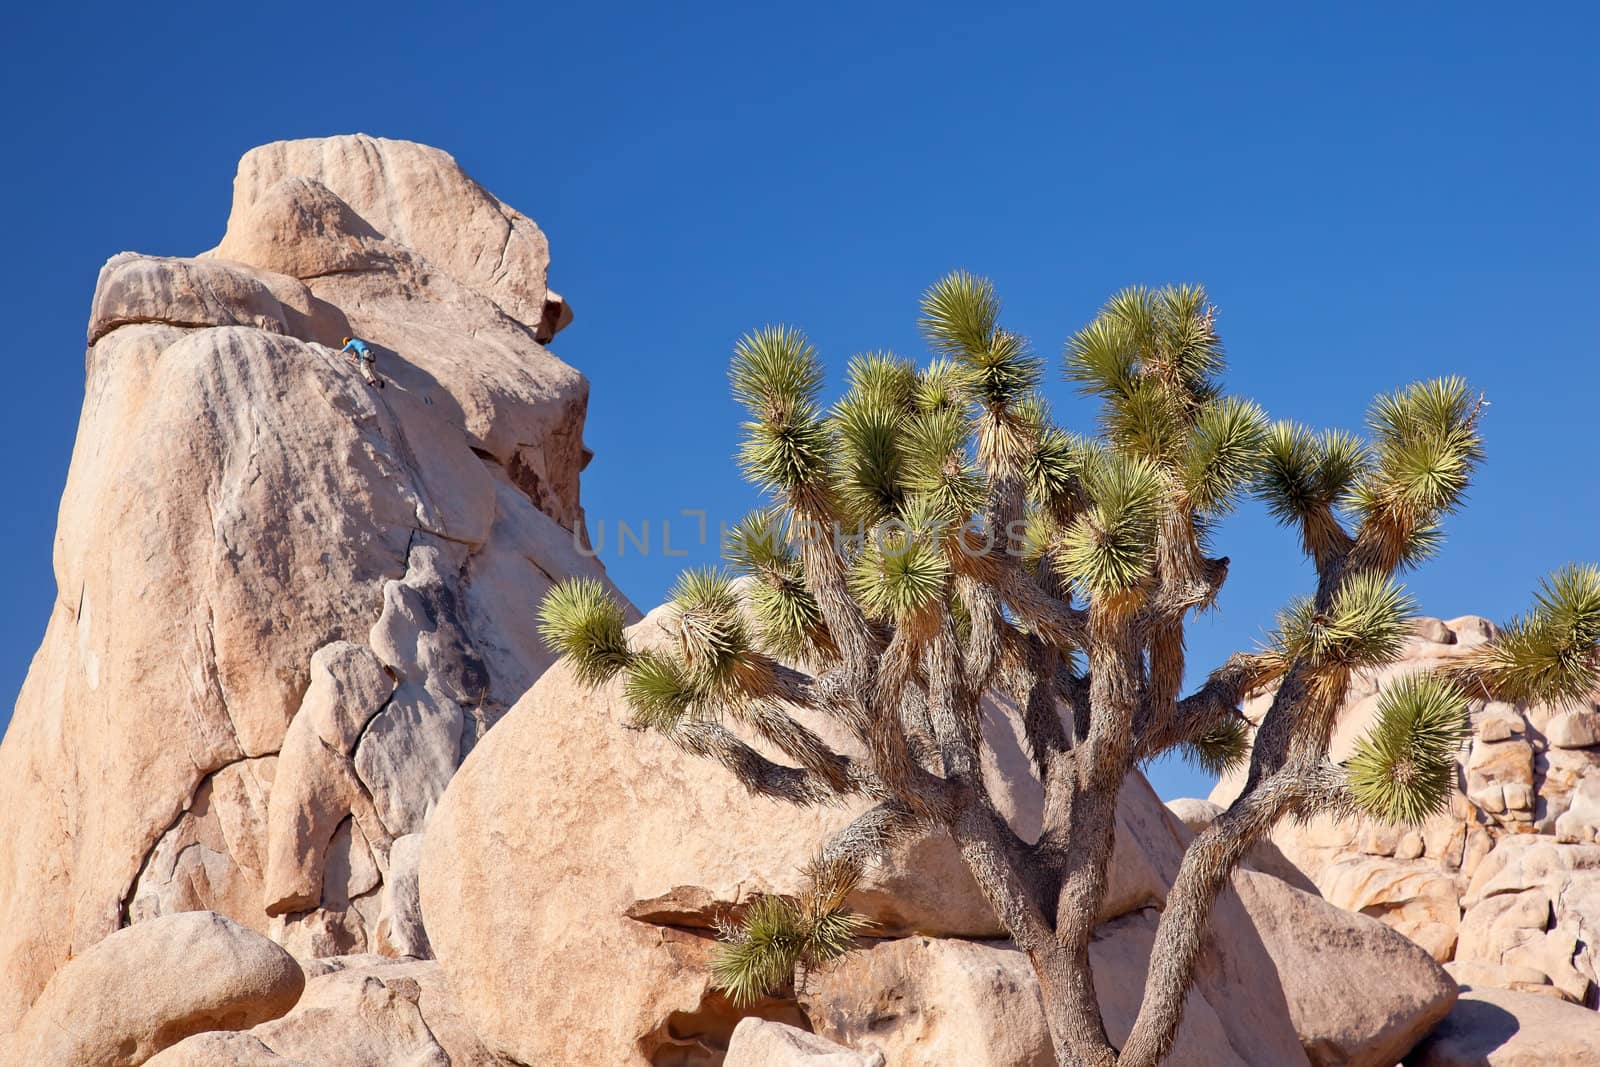 Rock Climber Joshua Tree Big Rocks Yucca Brevifolia Mojave Desert Joshua Tree National Park California Named by the Mormon Settlers for Joshua in the Bible because the branches look like outstretched hands